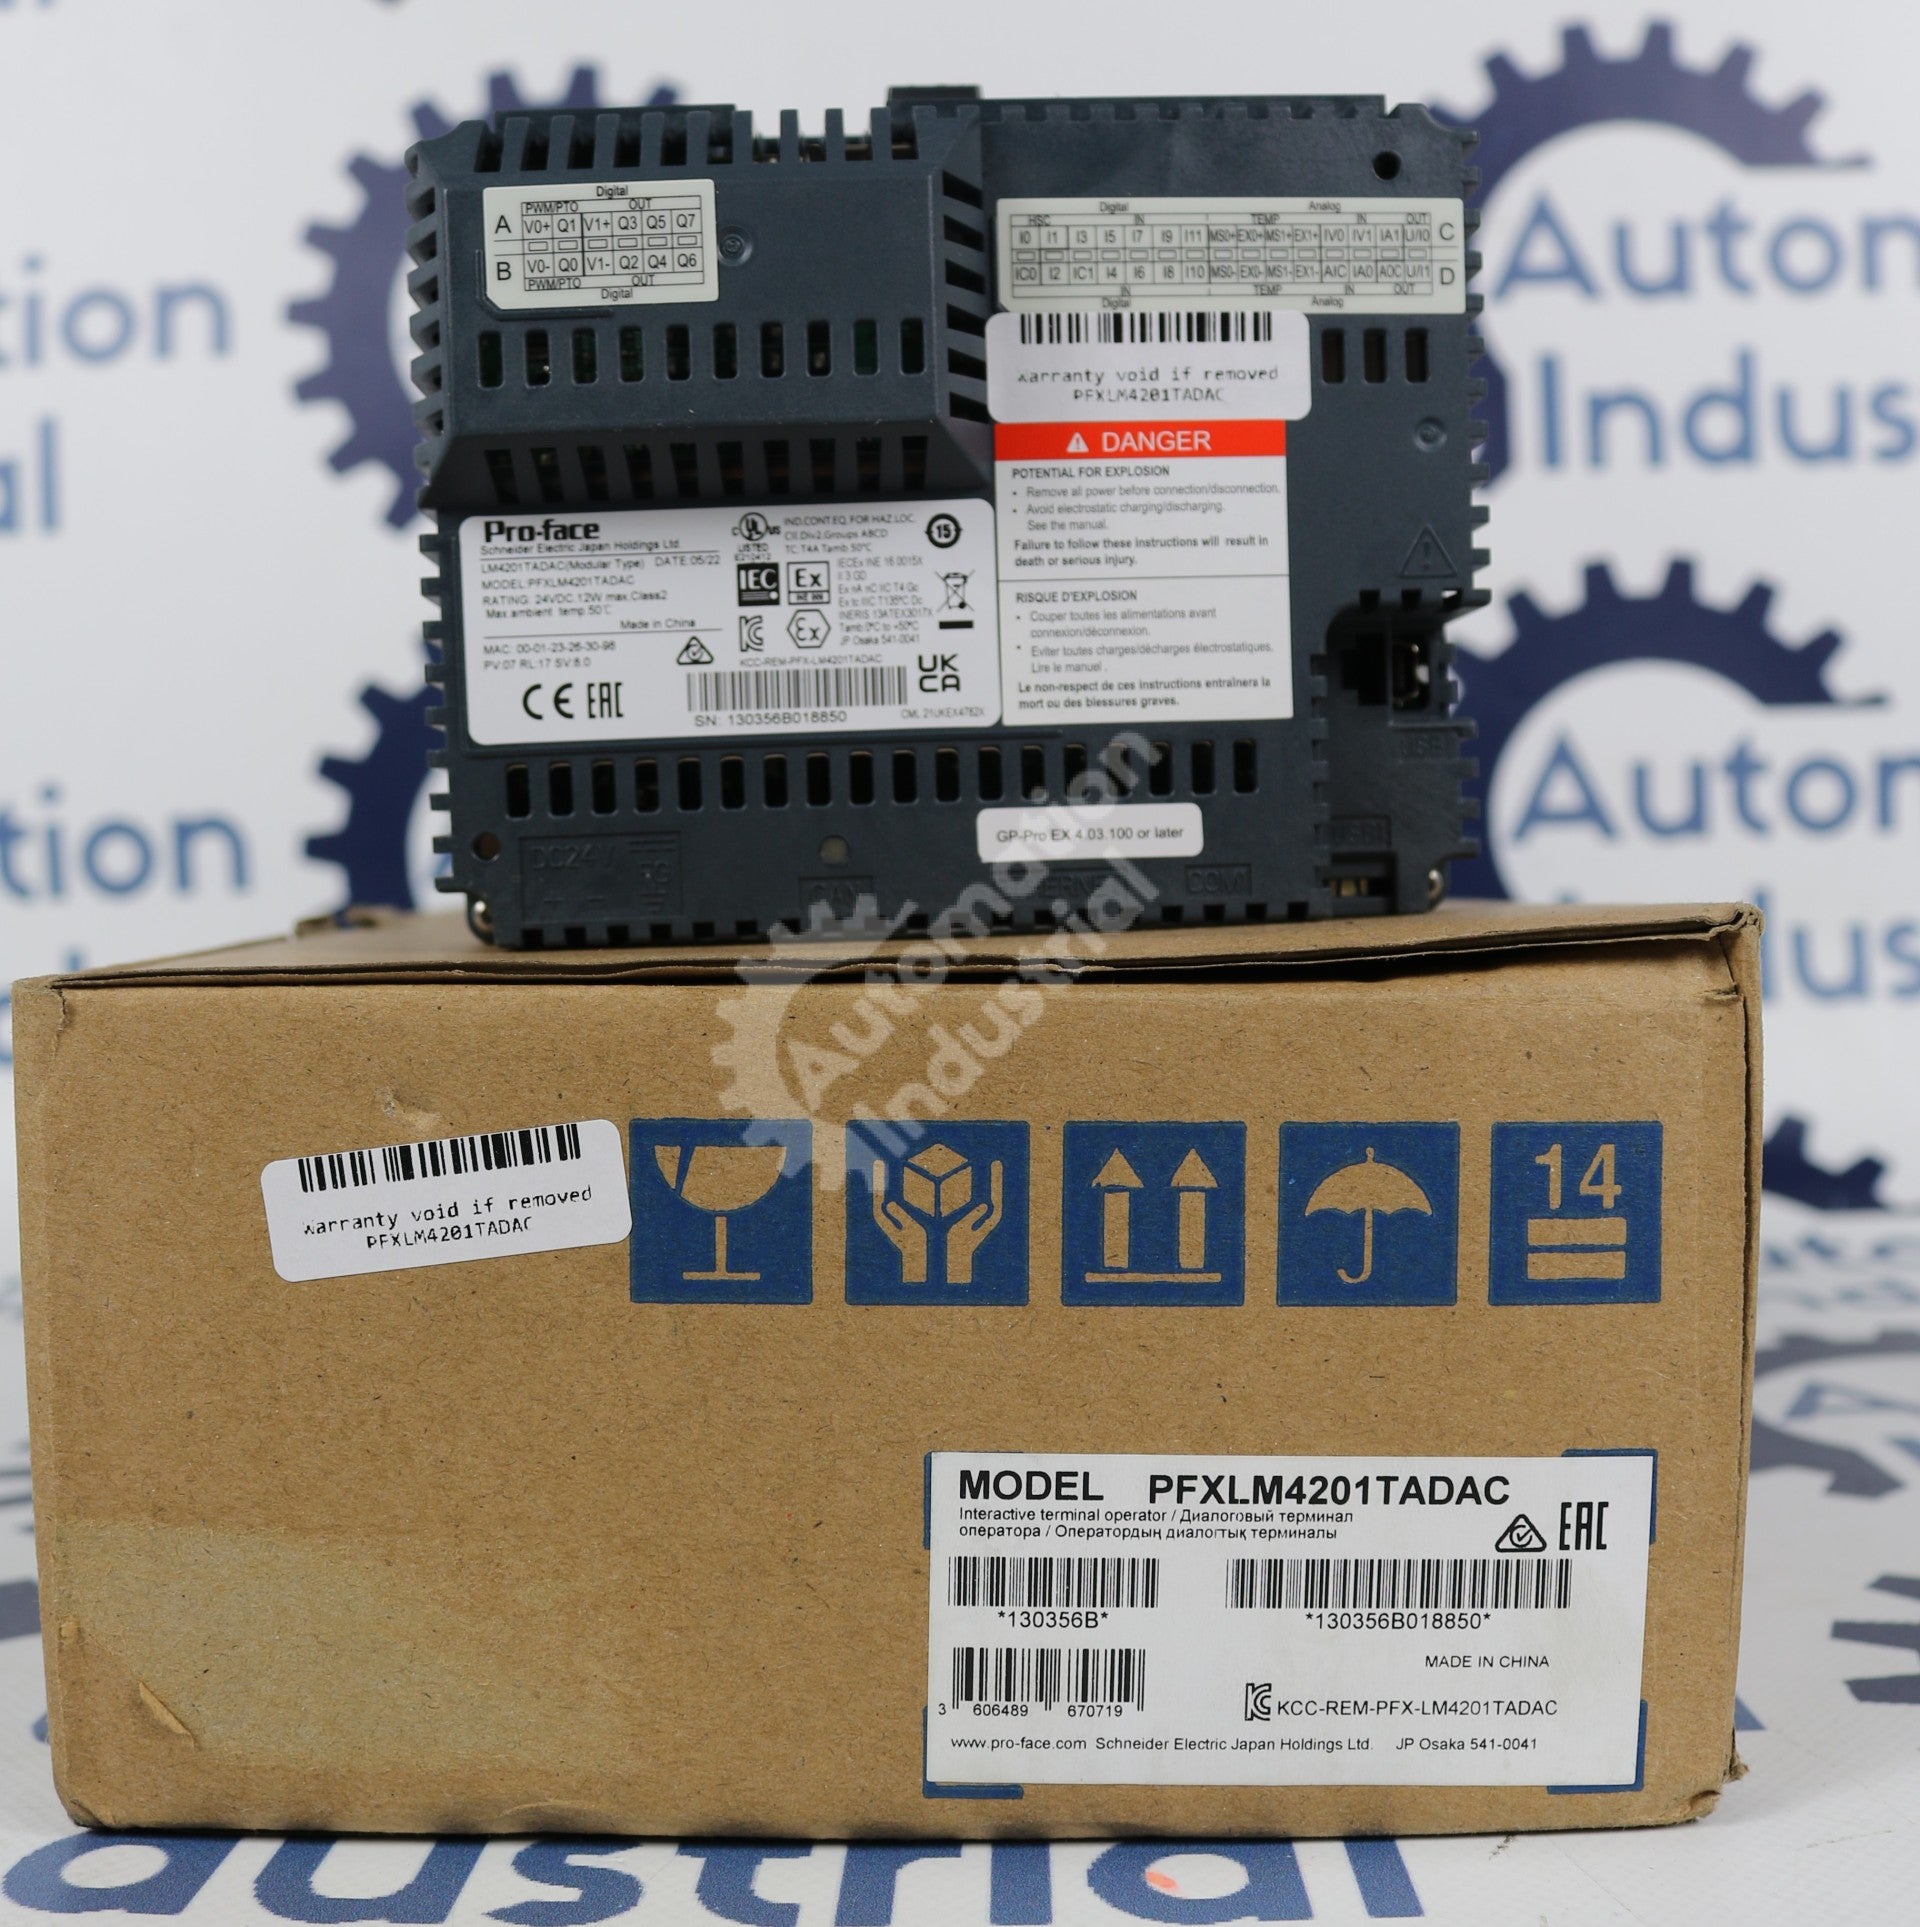 PFXLM4201TADAC by Pro-Face Operator Interface  New Surplus Factory Package